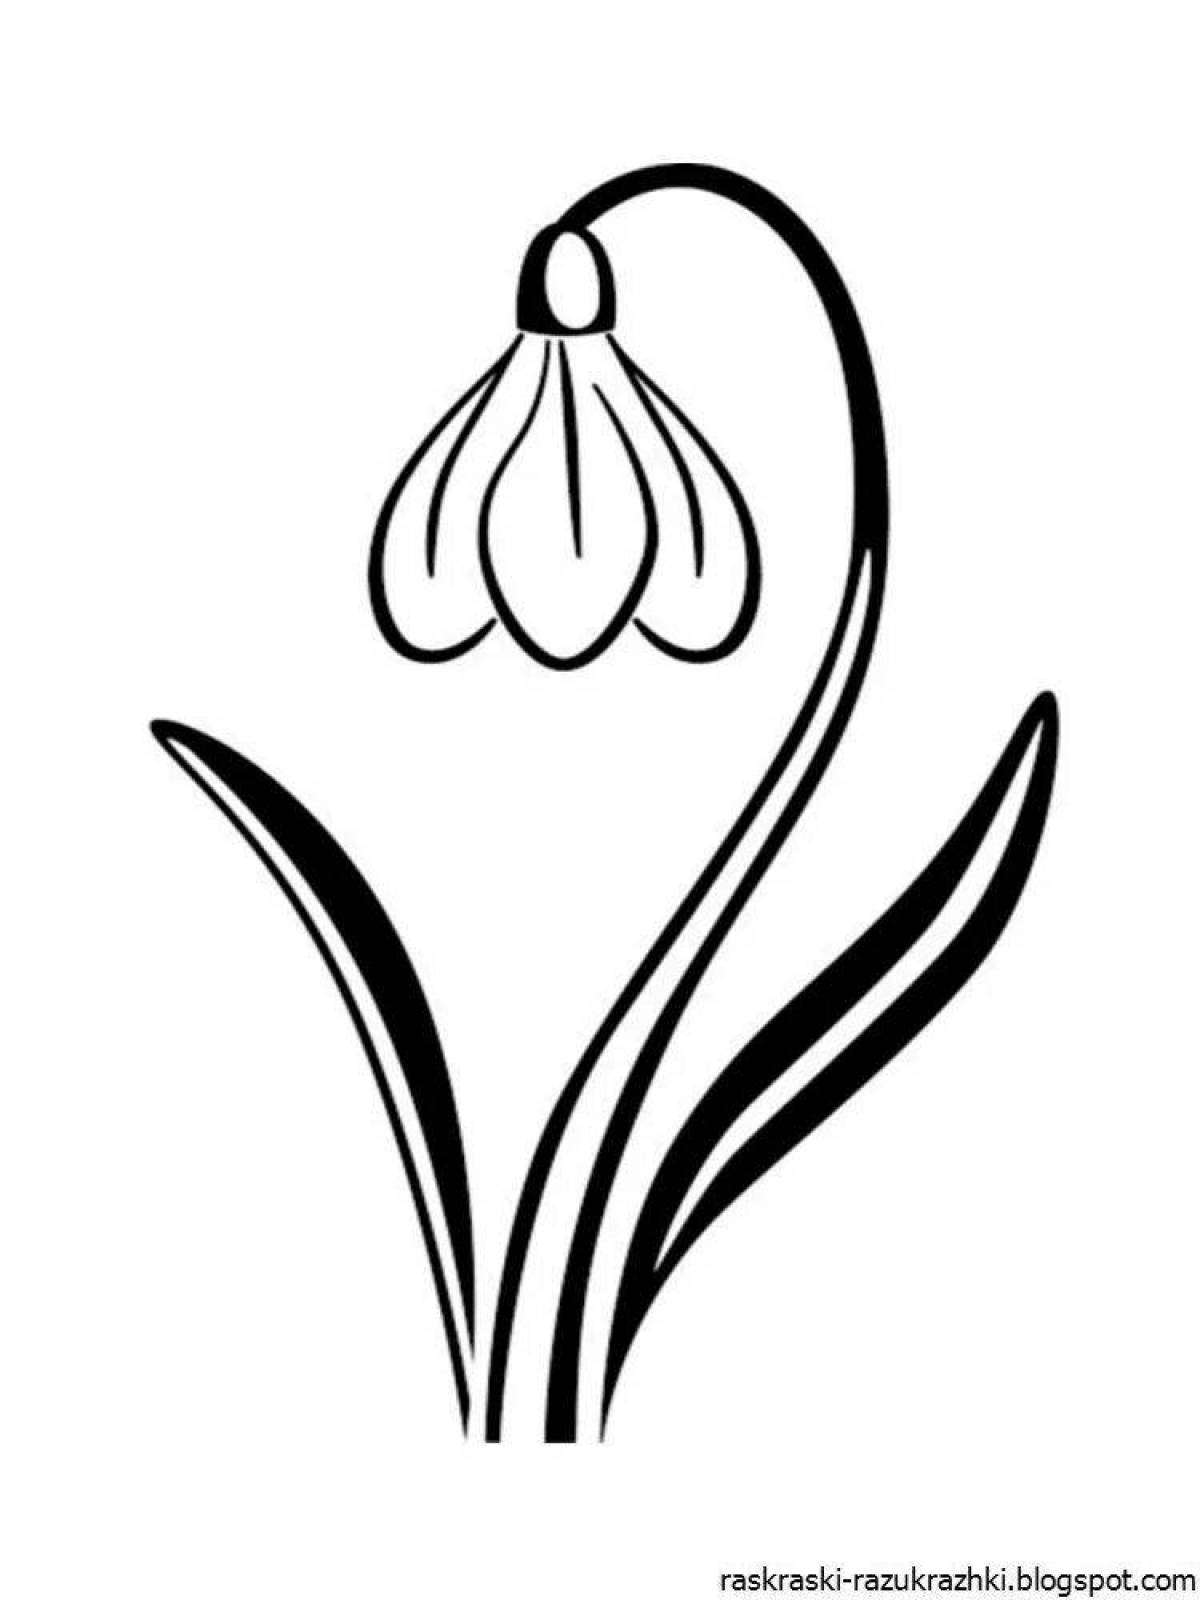 Joyful snowdrops coloring for kids